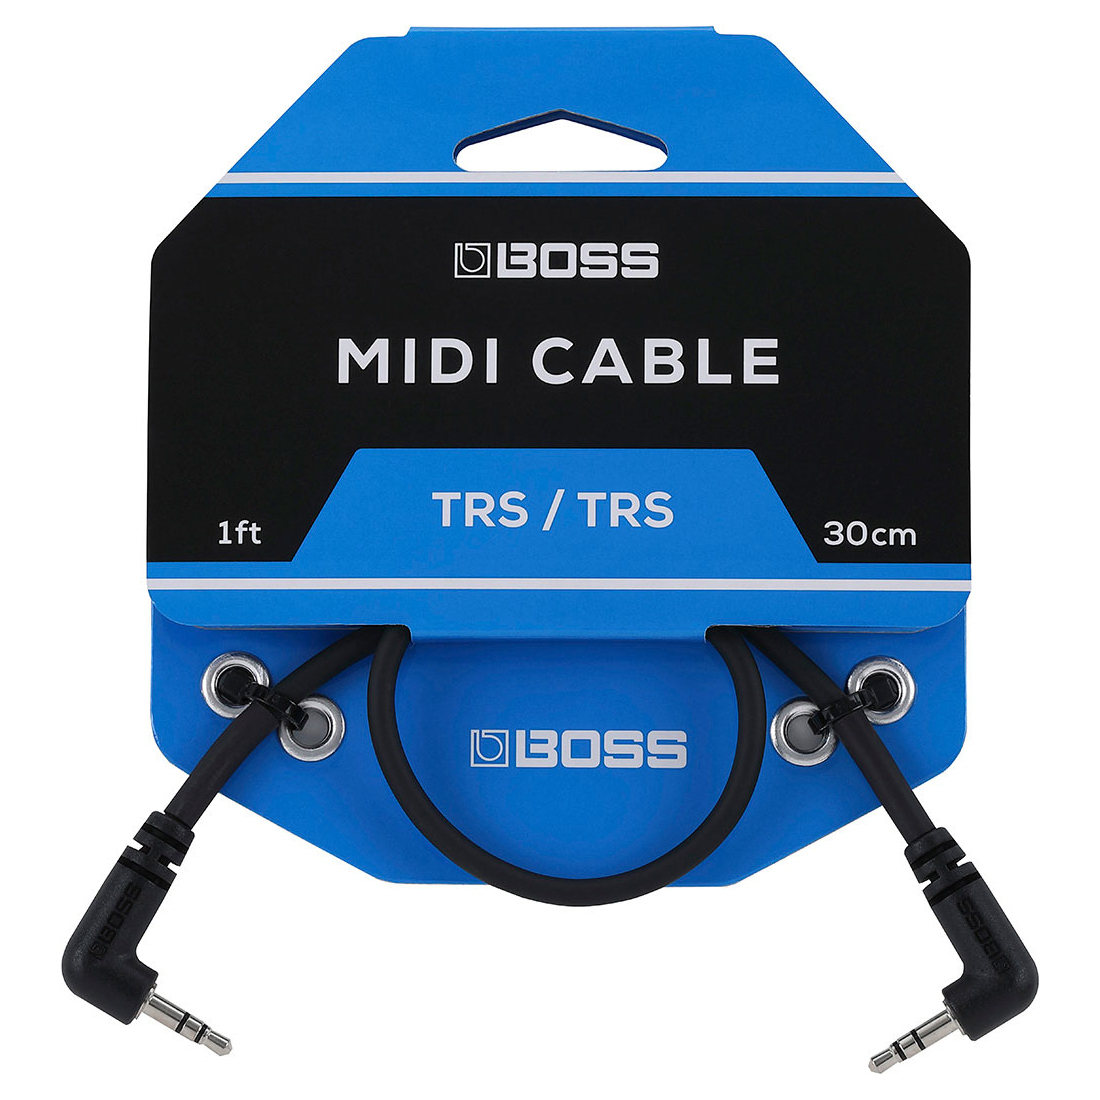 BCC-1-3535 MIDI Cable - 1 Foot